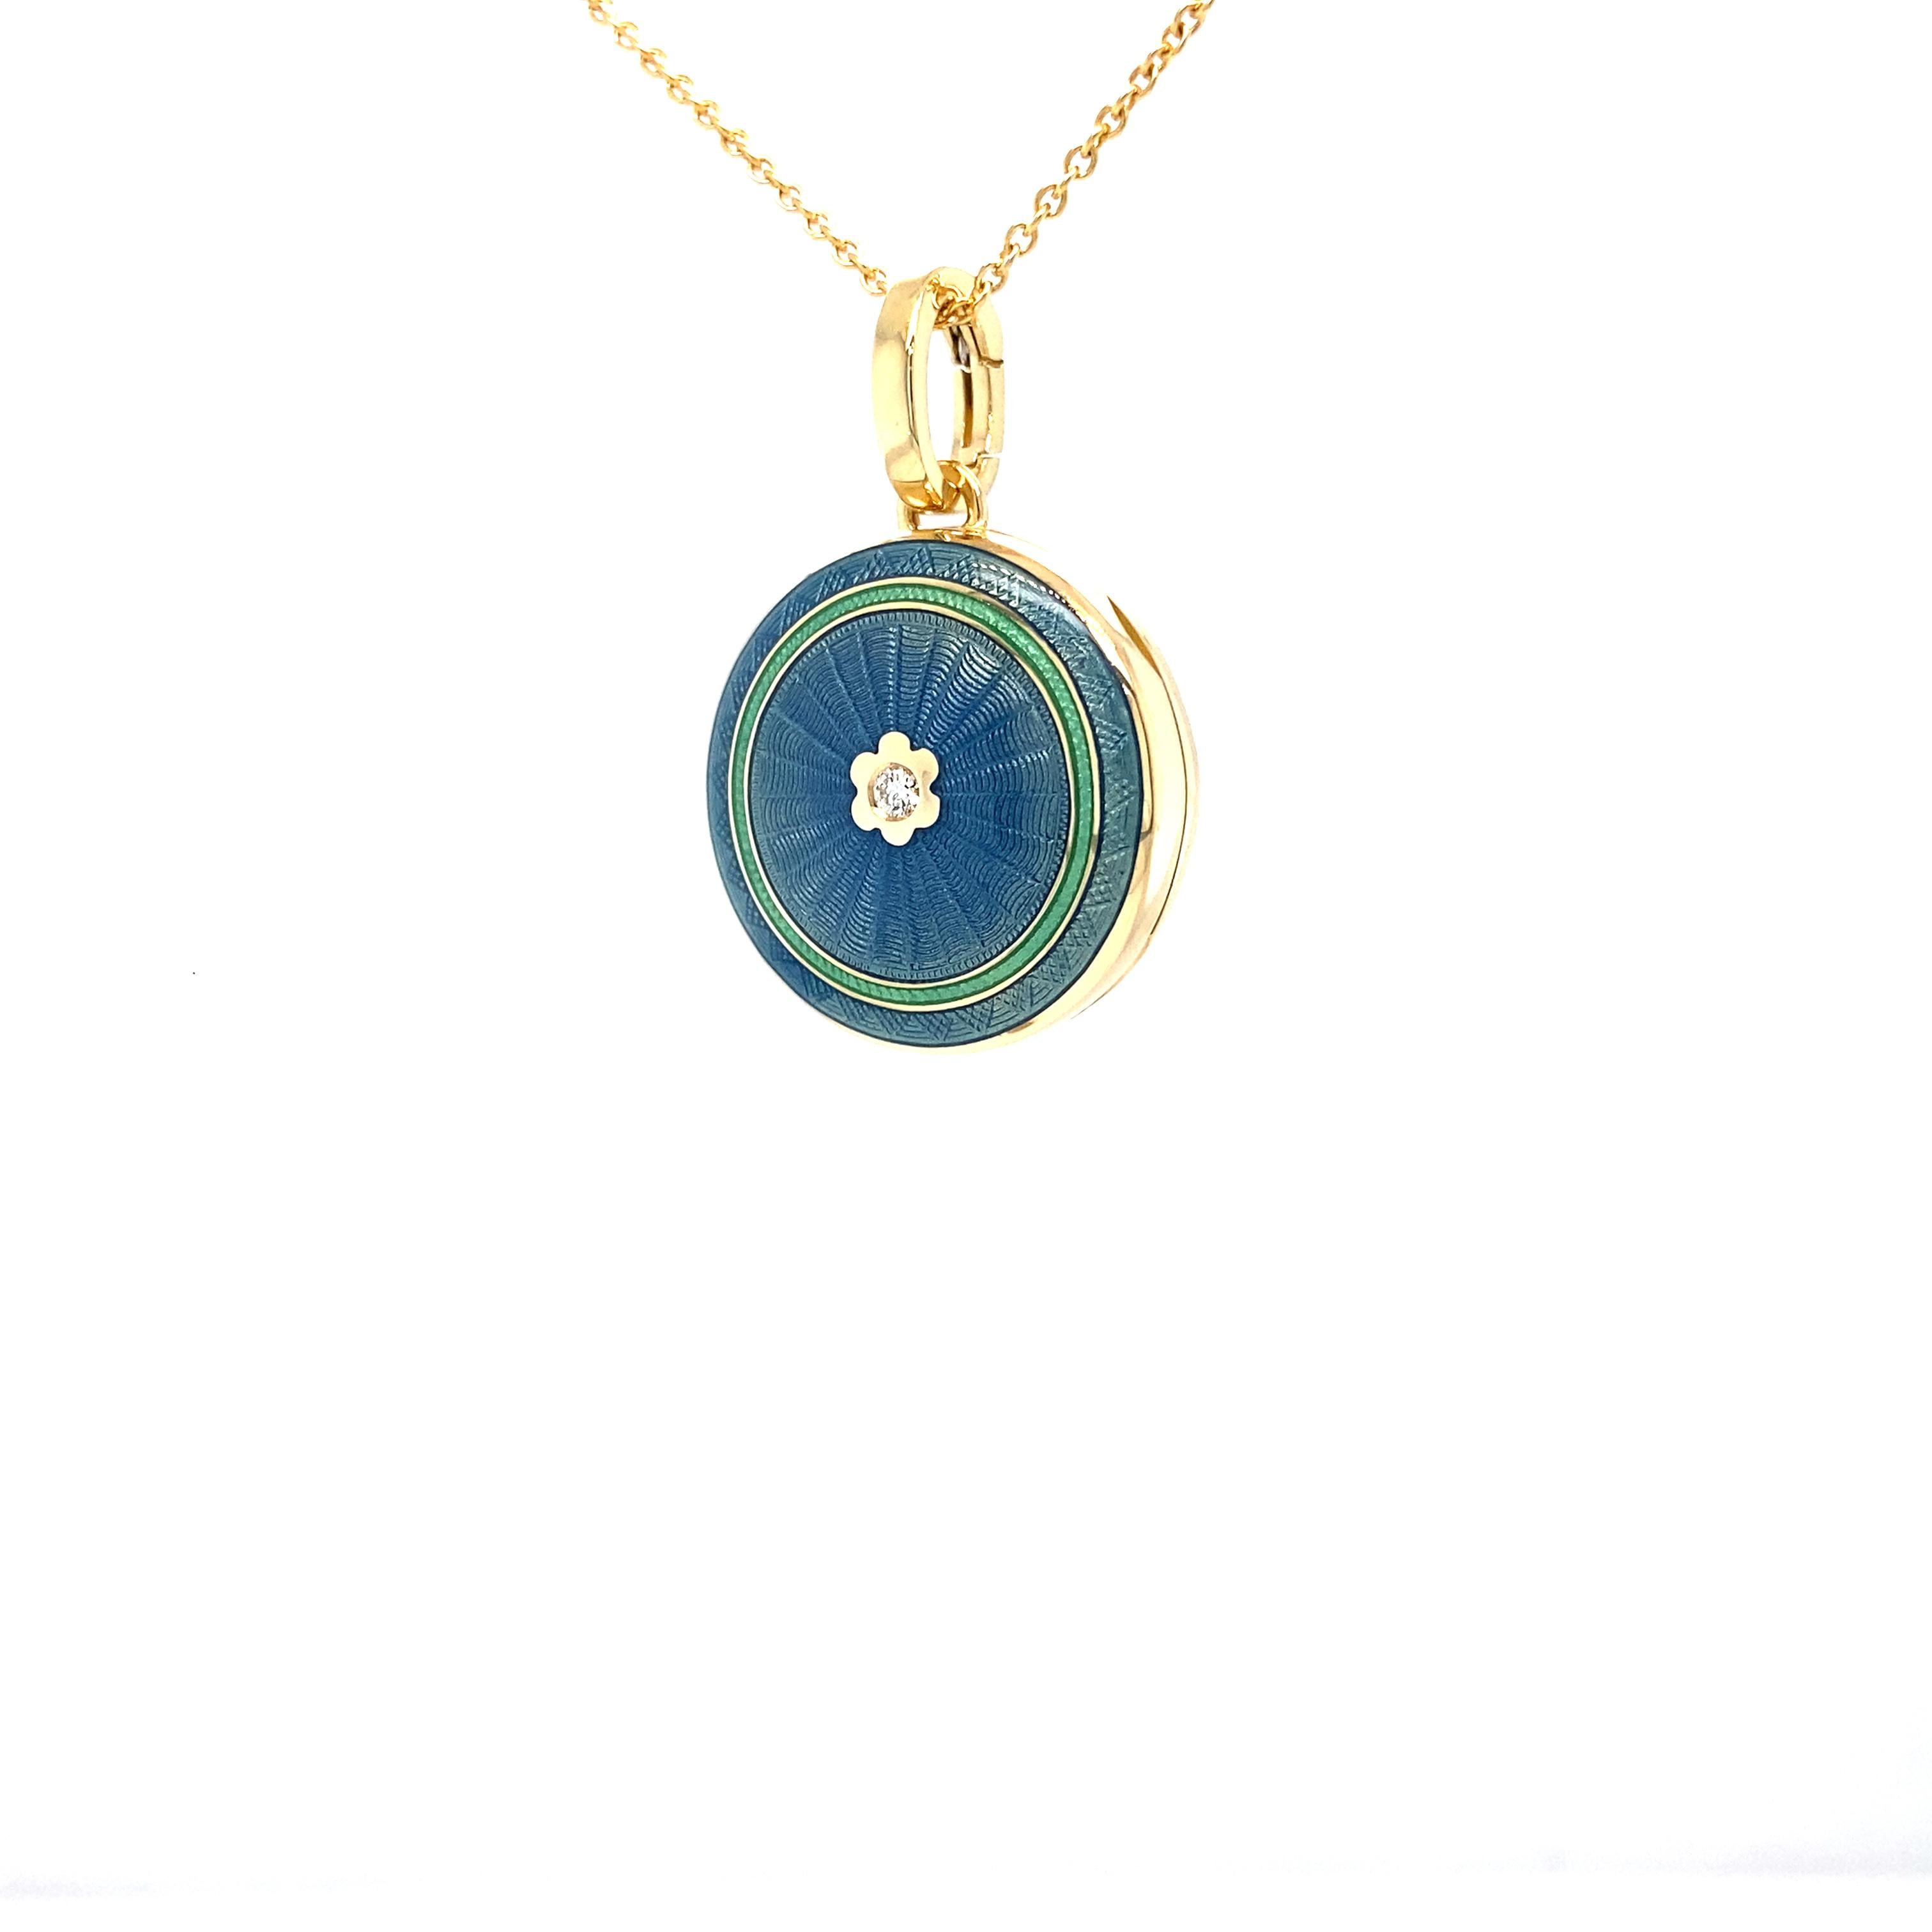 Victor Mayer round locket pendant necklace 18k yellow gold, Hallmark collection, blue and turquoise vitreous enamel, guilloche,  1 diamond, total 0.03 ct, H VS, brilliant cut, diameter app. 21.0 mm

About the creator Victor Mayer 
Victor Mayer is